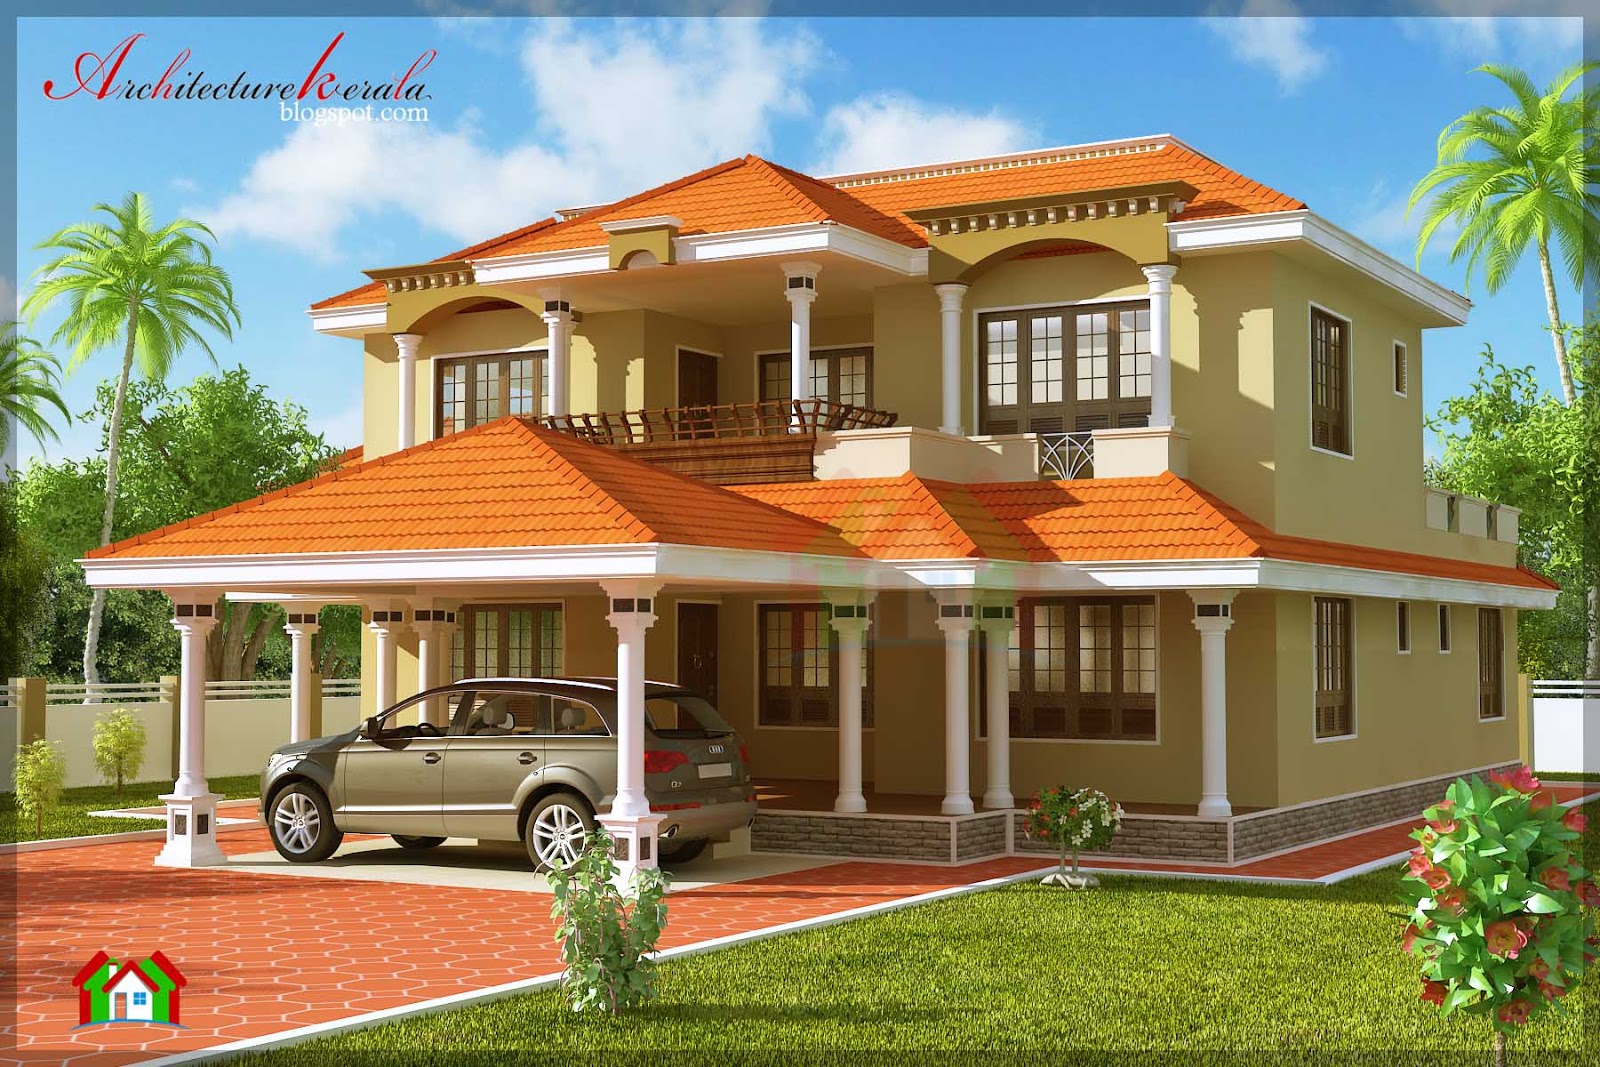 4 BHK TRADITIONAL STYLE HOUSE PLAN DETAILS  ARCHITECTURE KERALA